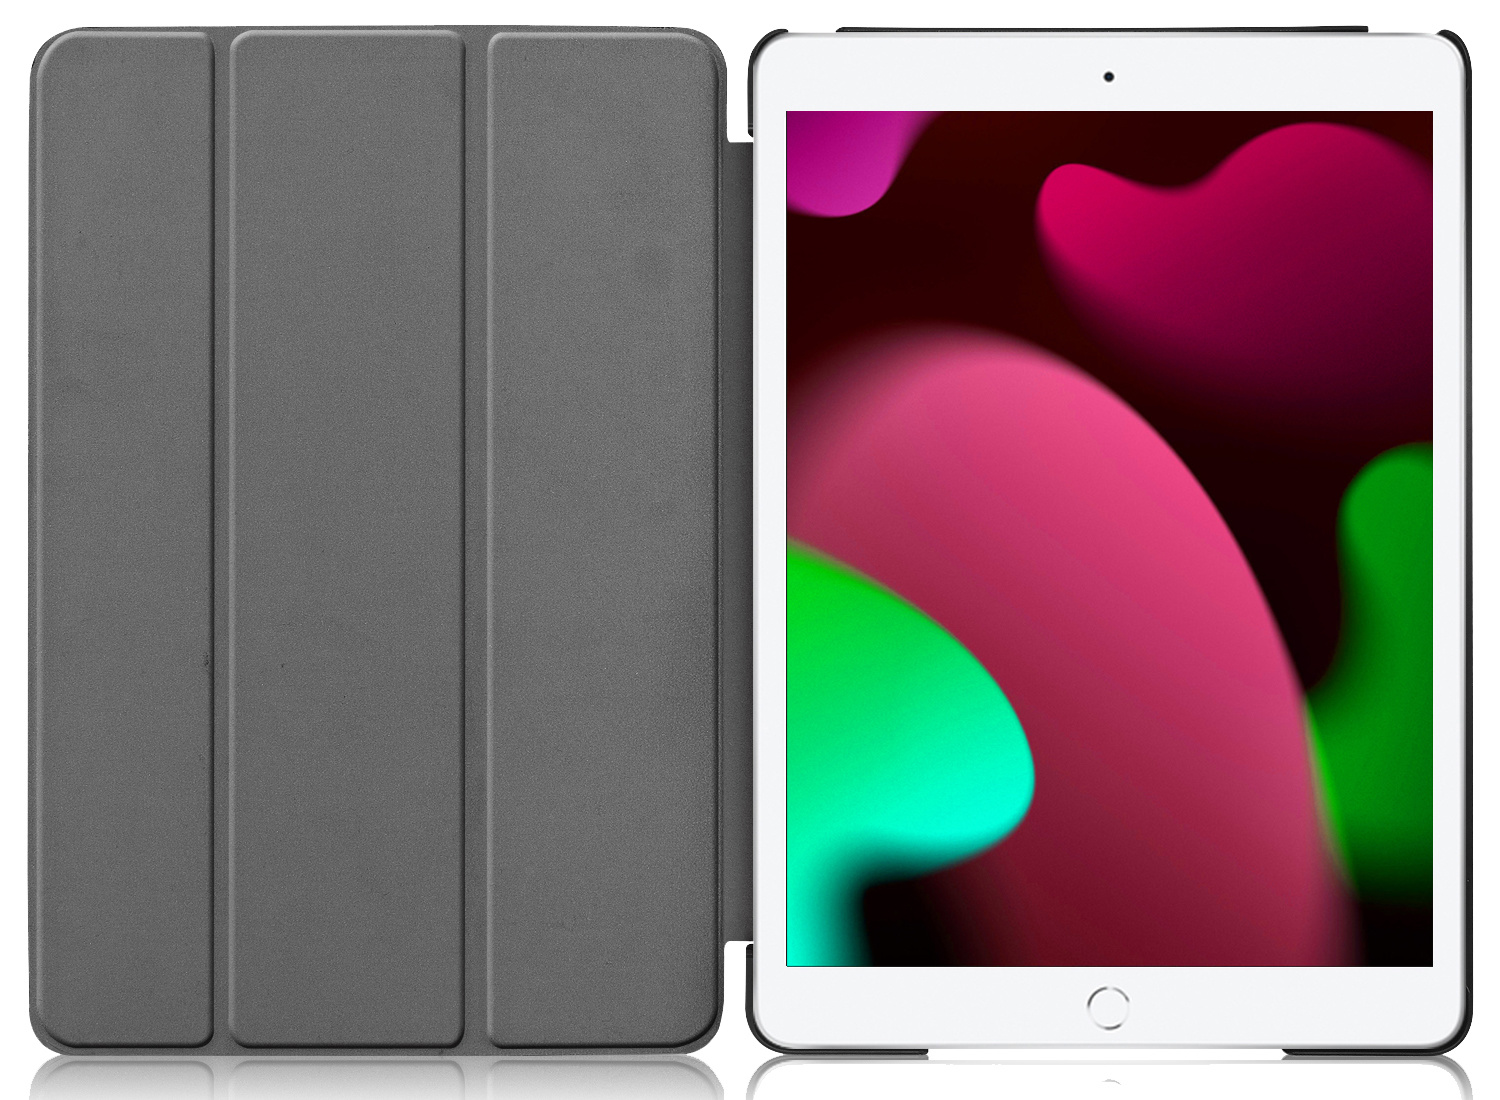 Nomfy iPad 10.2 2020 Hoesje Book Case Hoes - iPad 10.2 2020 Hoes Hardcover Case Hoesje - Lichtblauw